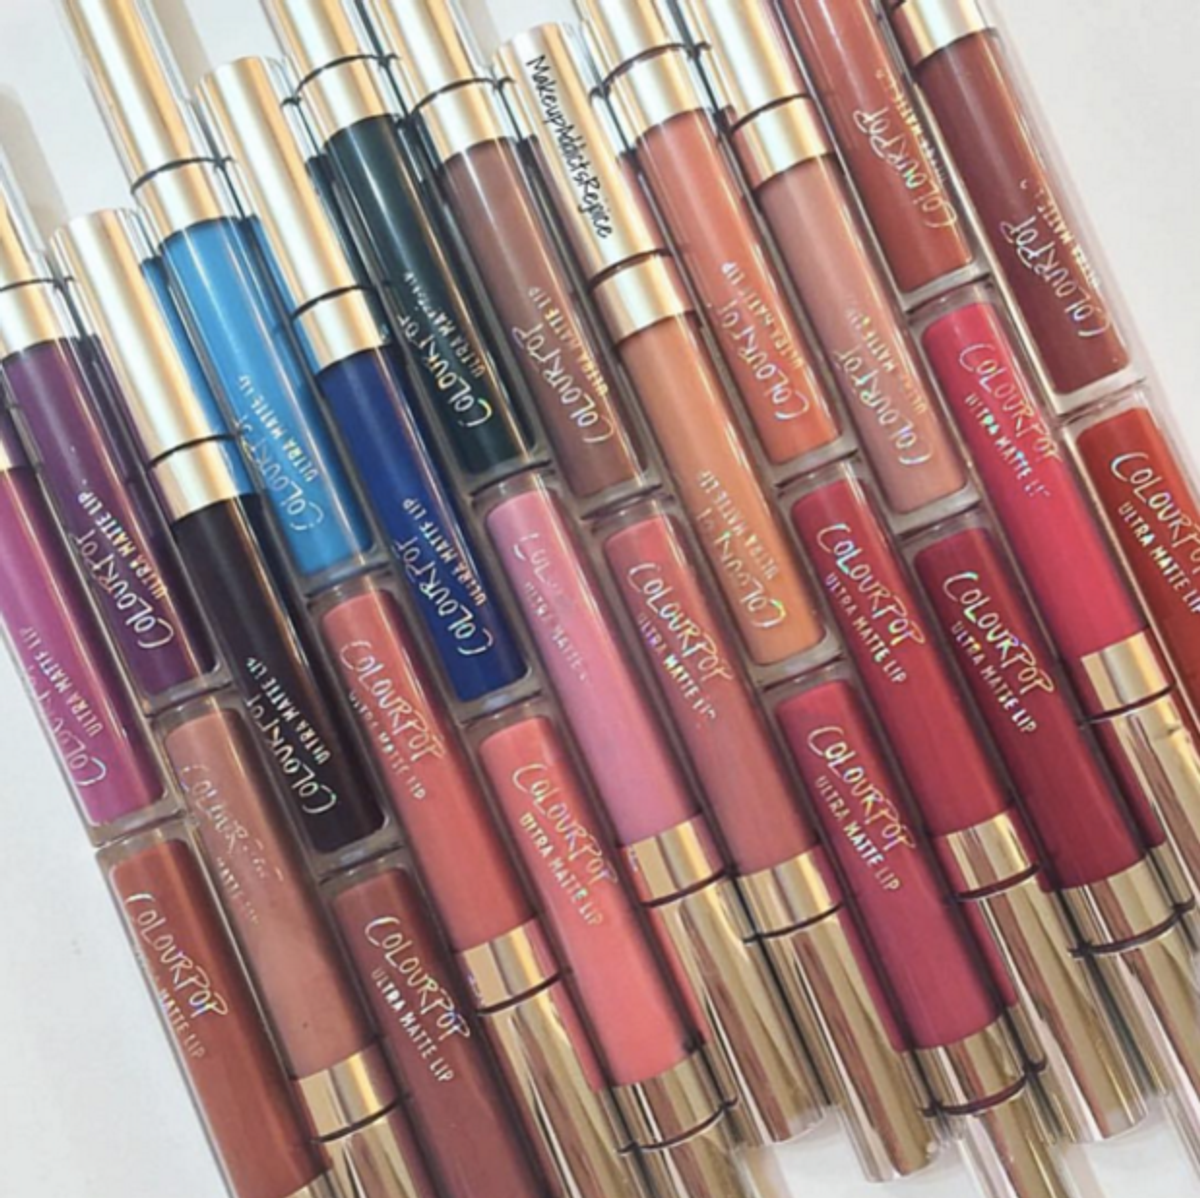 11 Colourpop Items That Are Worth A Buy